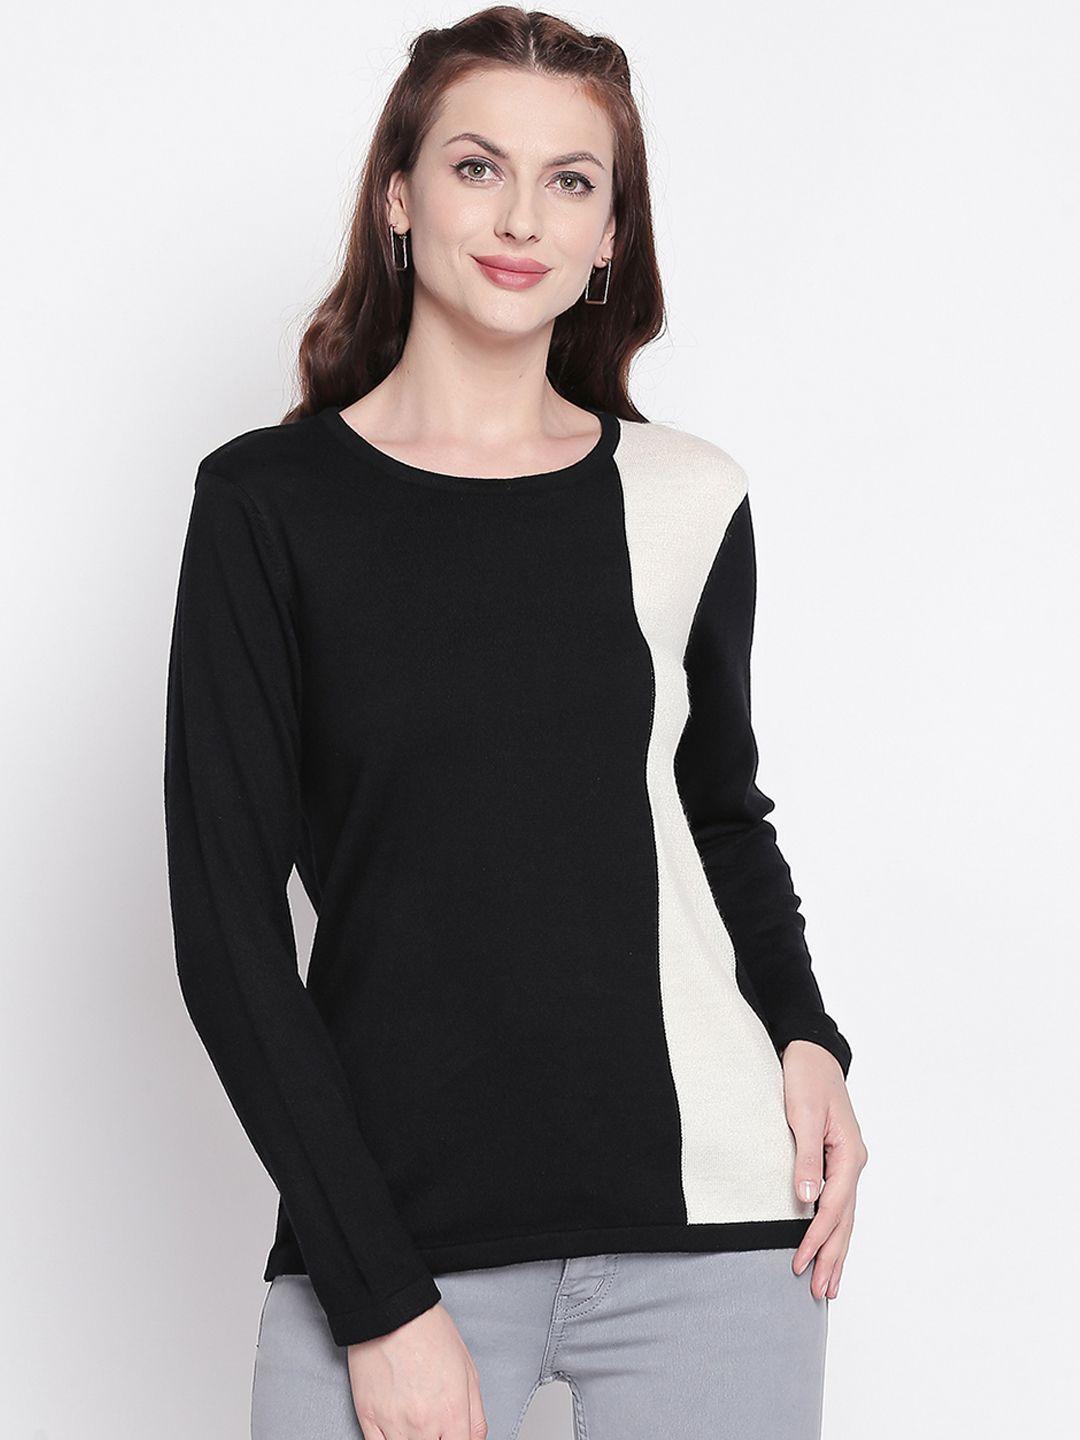 annabelle by pantaloons women black colourblocked pullover sweater